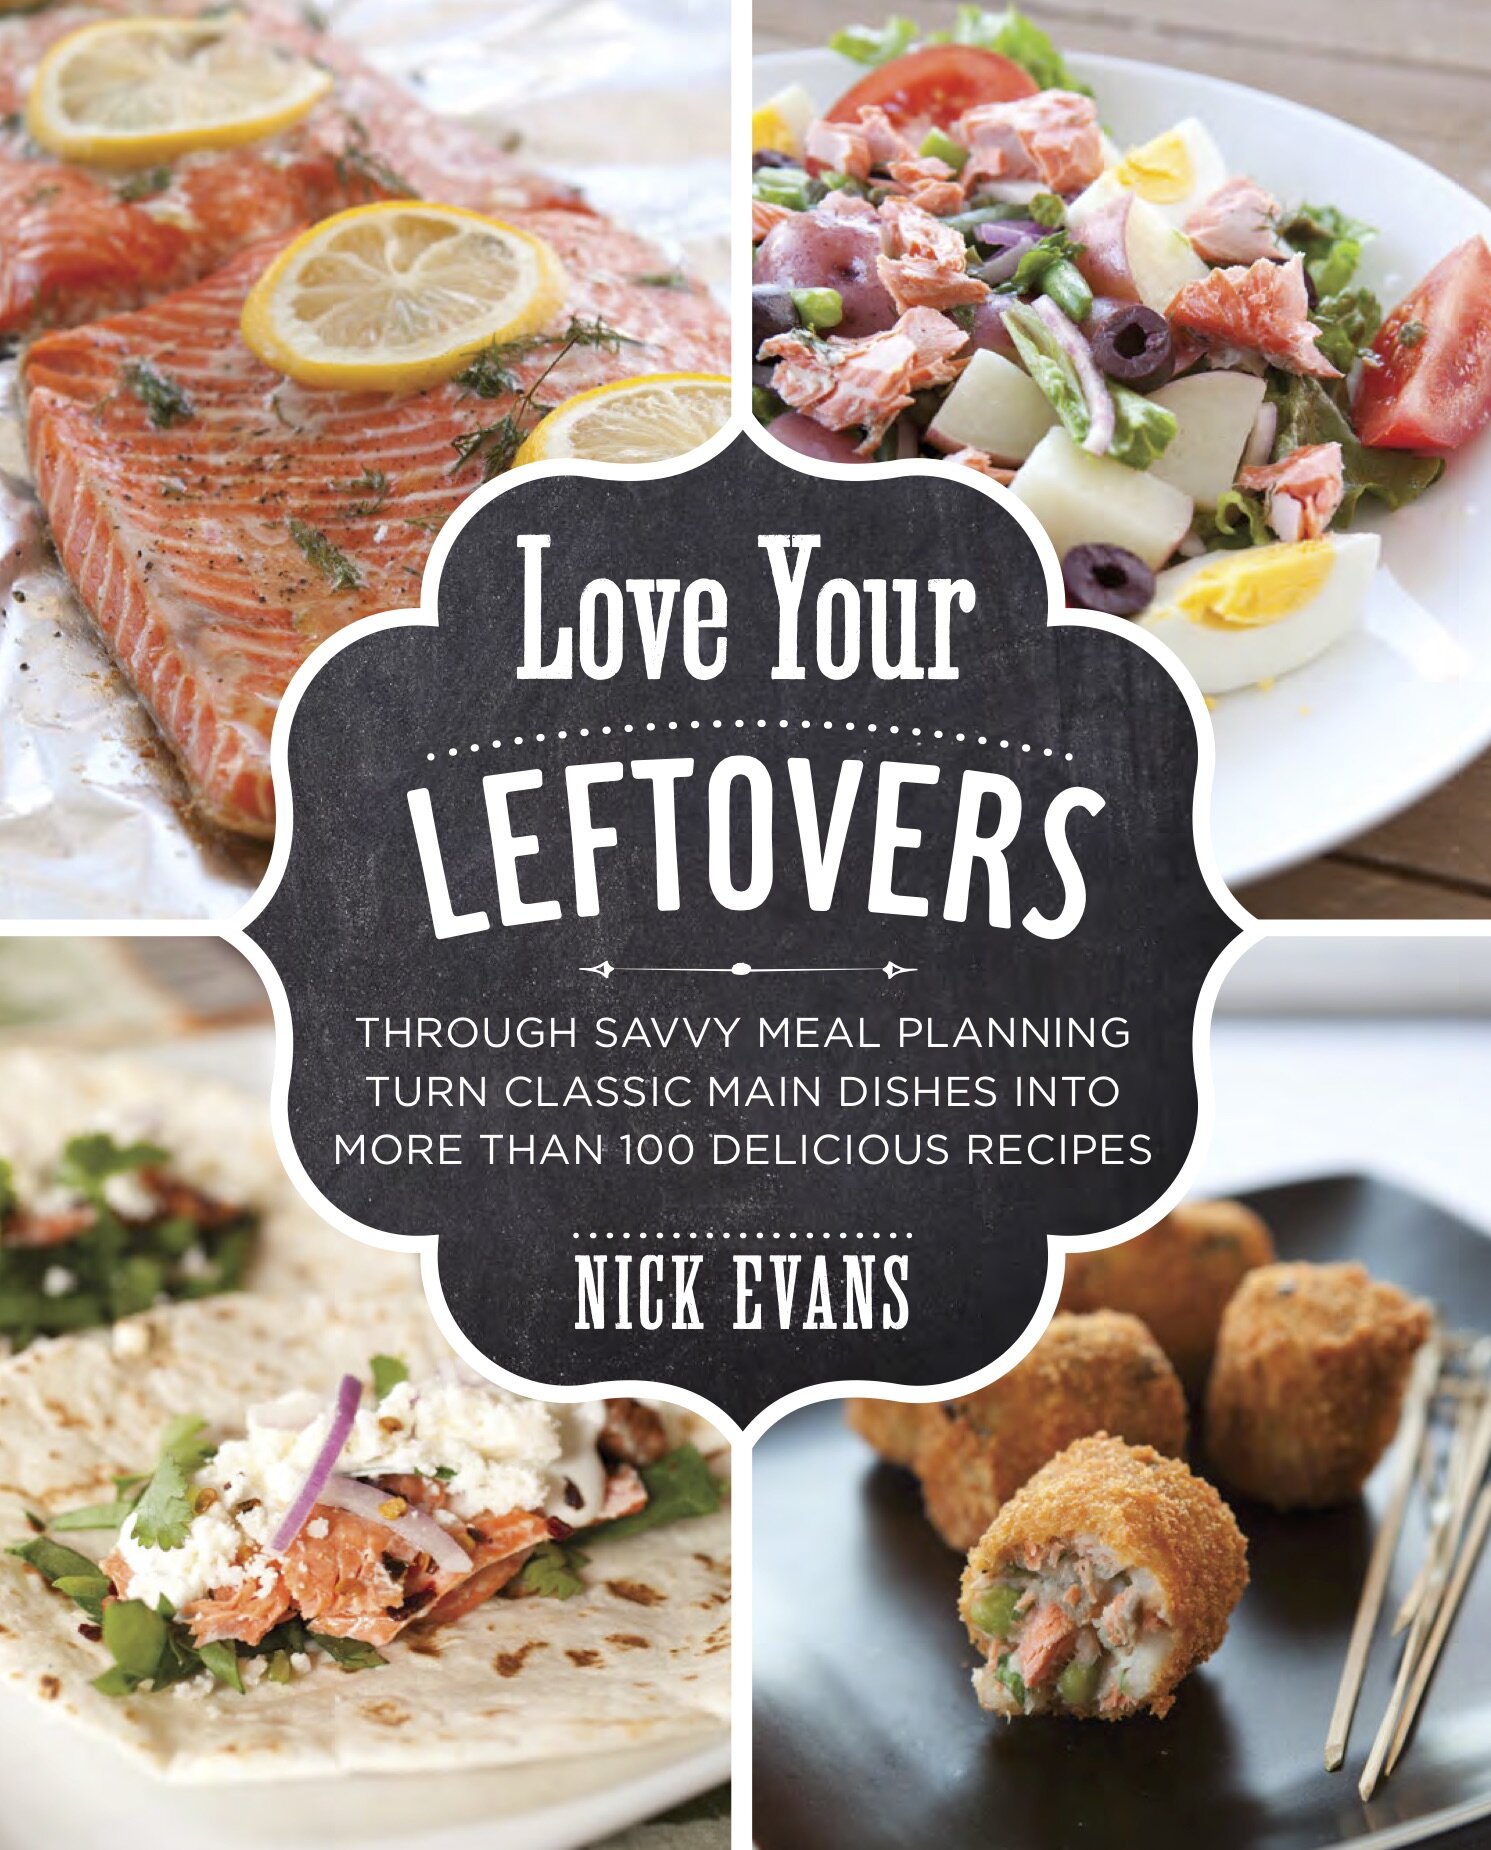 Love Your Leftovers by Nick Evans